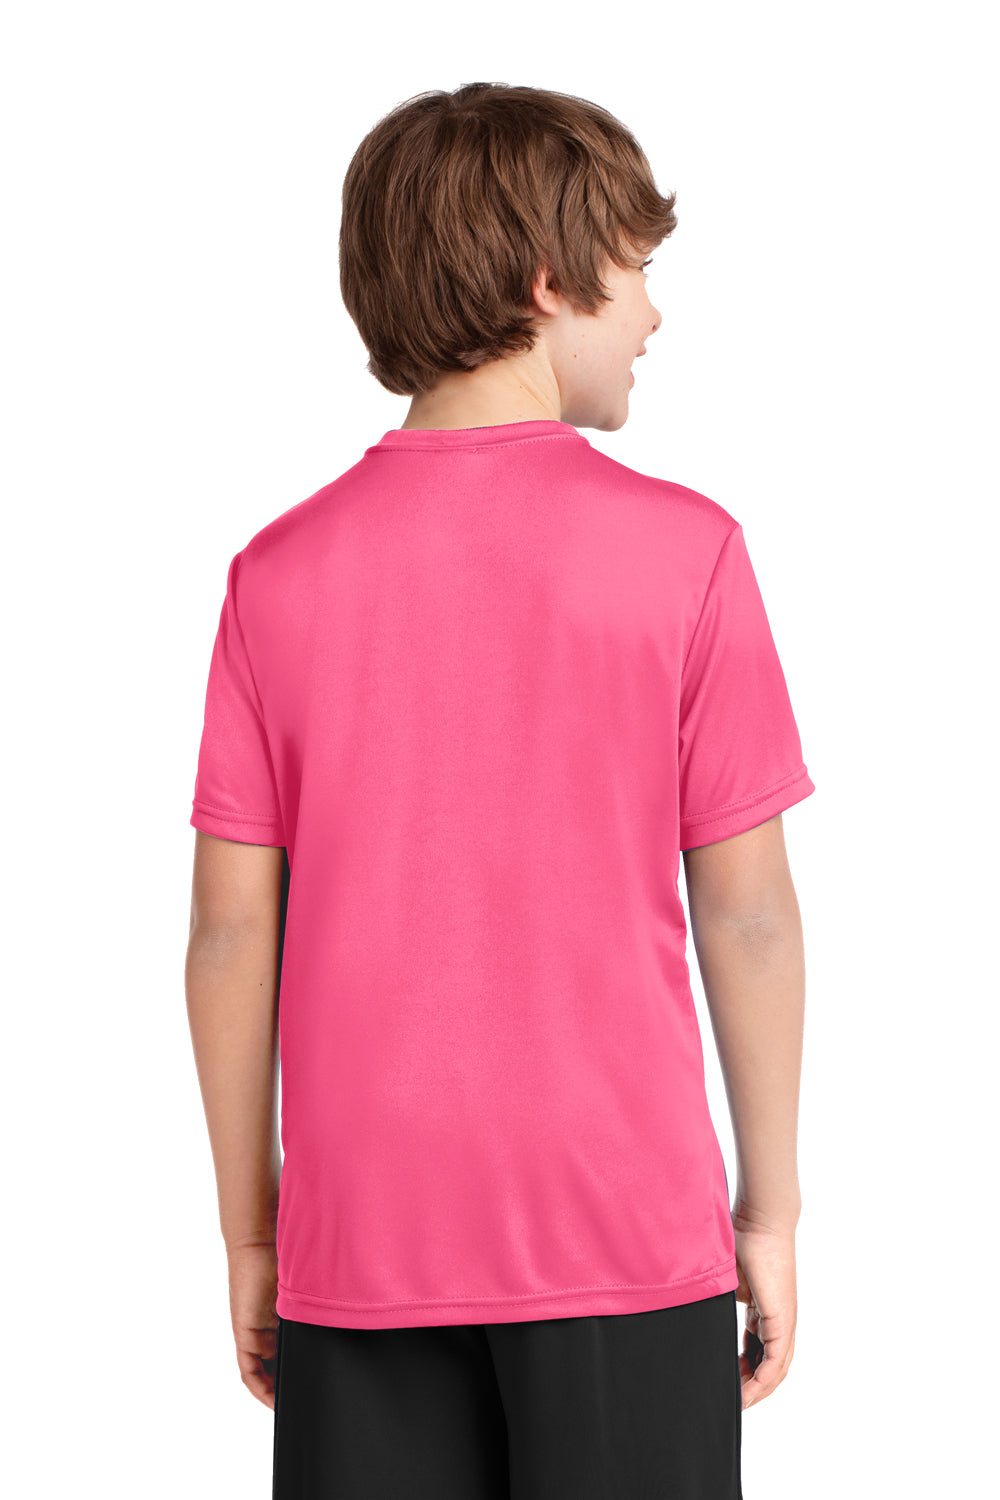 Port & Company PC380Y Youth Dry Zone Performance Moisture Wicking Short Sleeve Crewneck T-Shirt Neon Pink Back